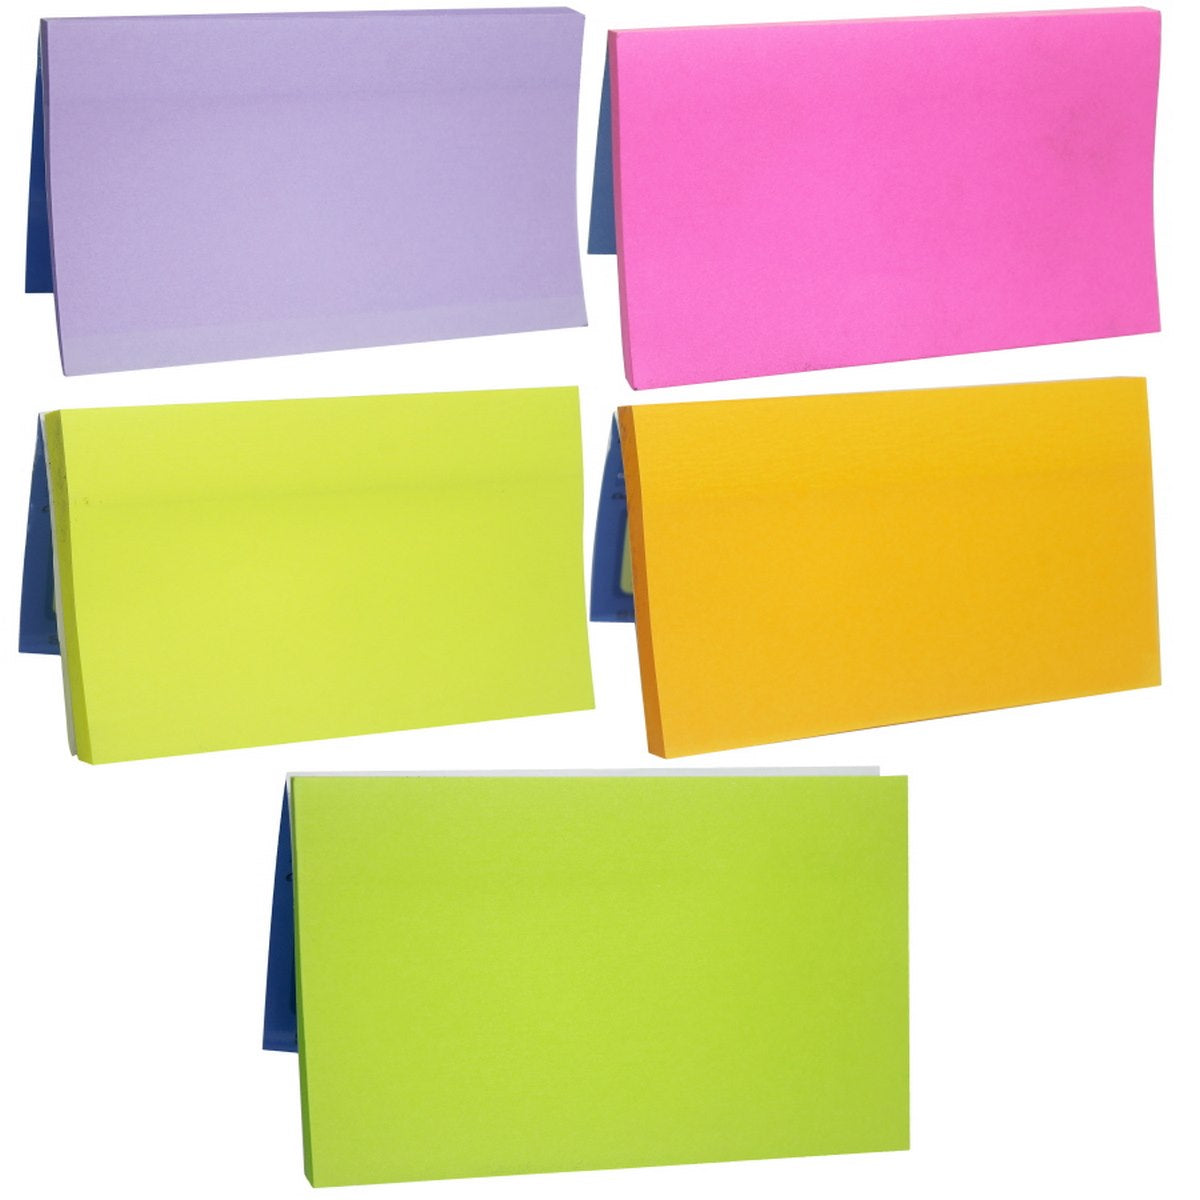 jags-mumbai Sticky Notes Neon pastel sticky notes (3x5 inches) 100 sheets- assorted color